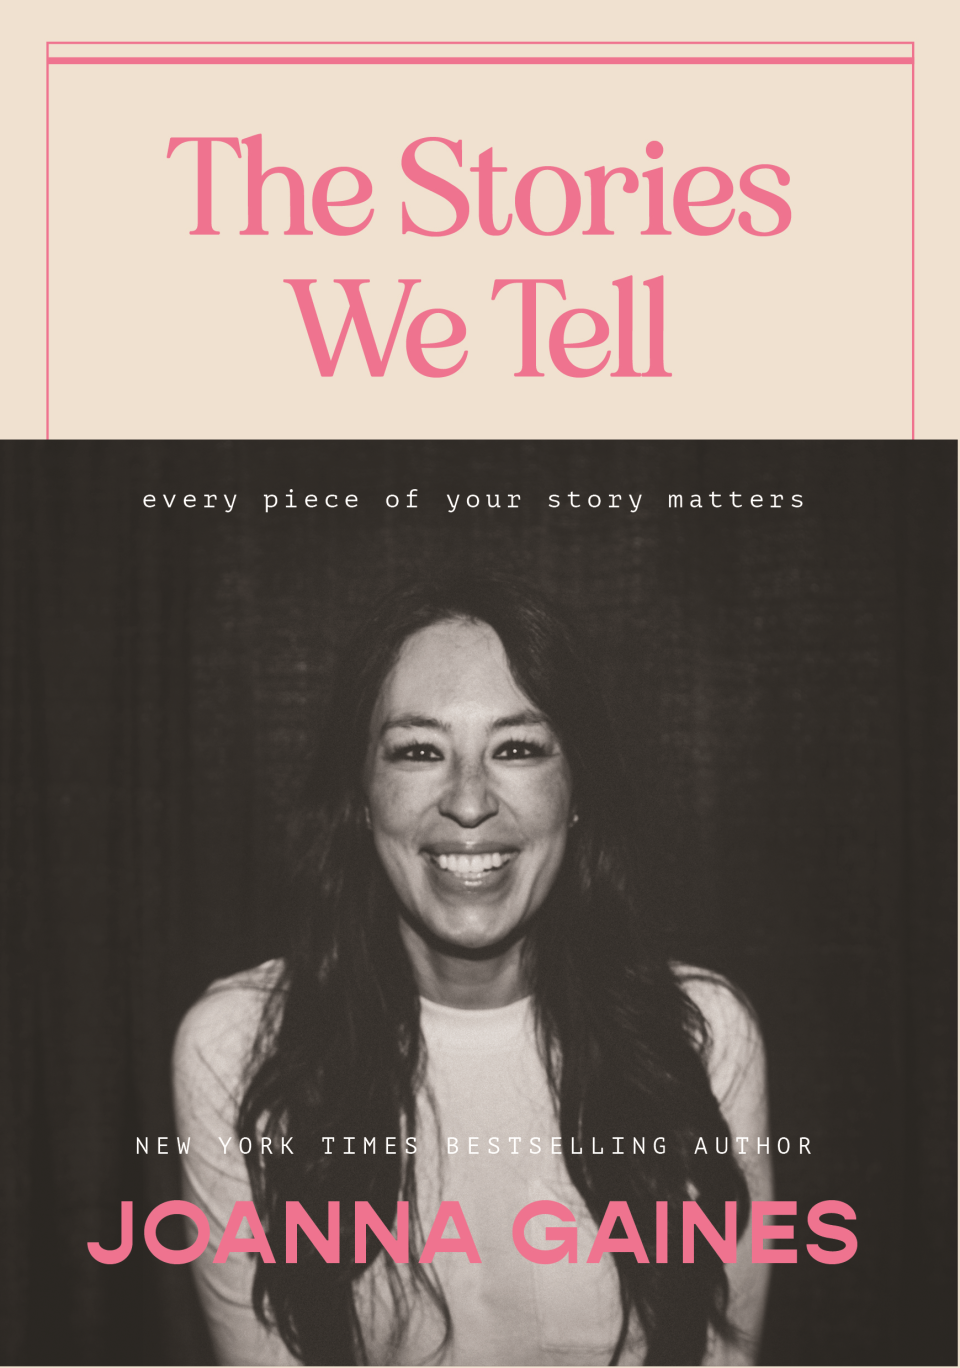 "The Stories We Tell: Every Piece of Your Story Matters" by Joanna Gaines is available now.